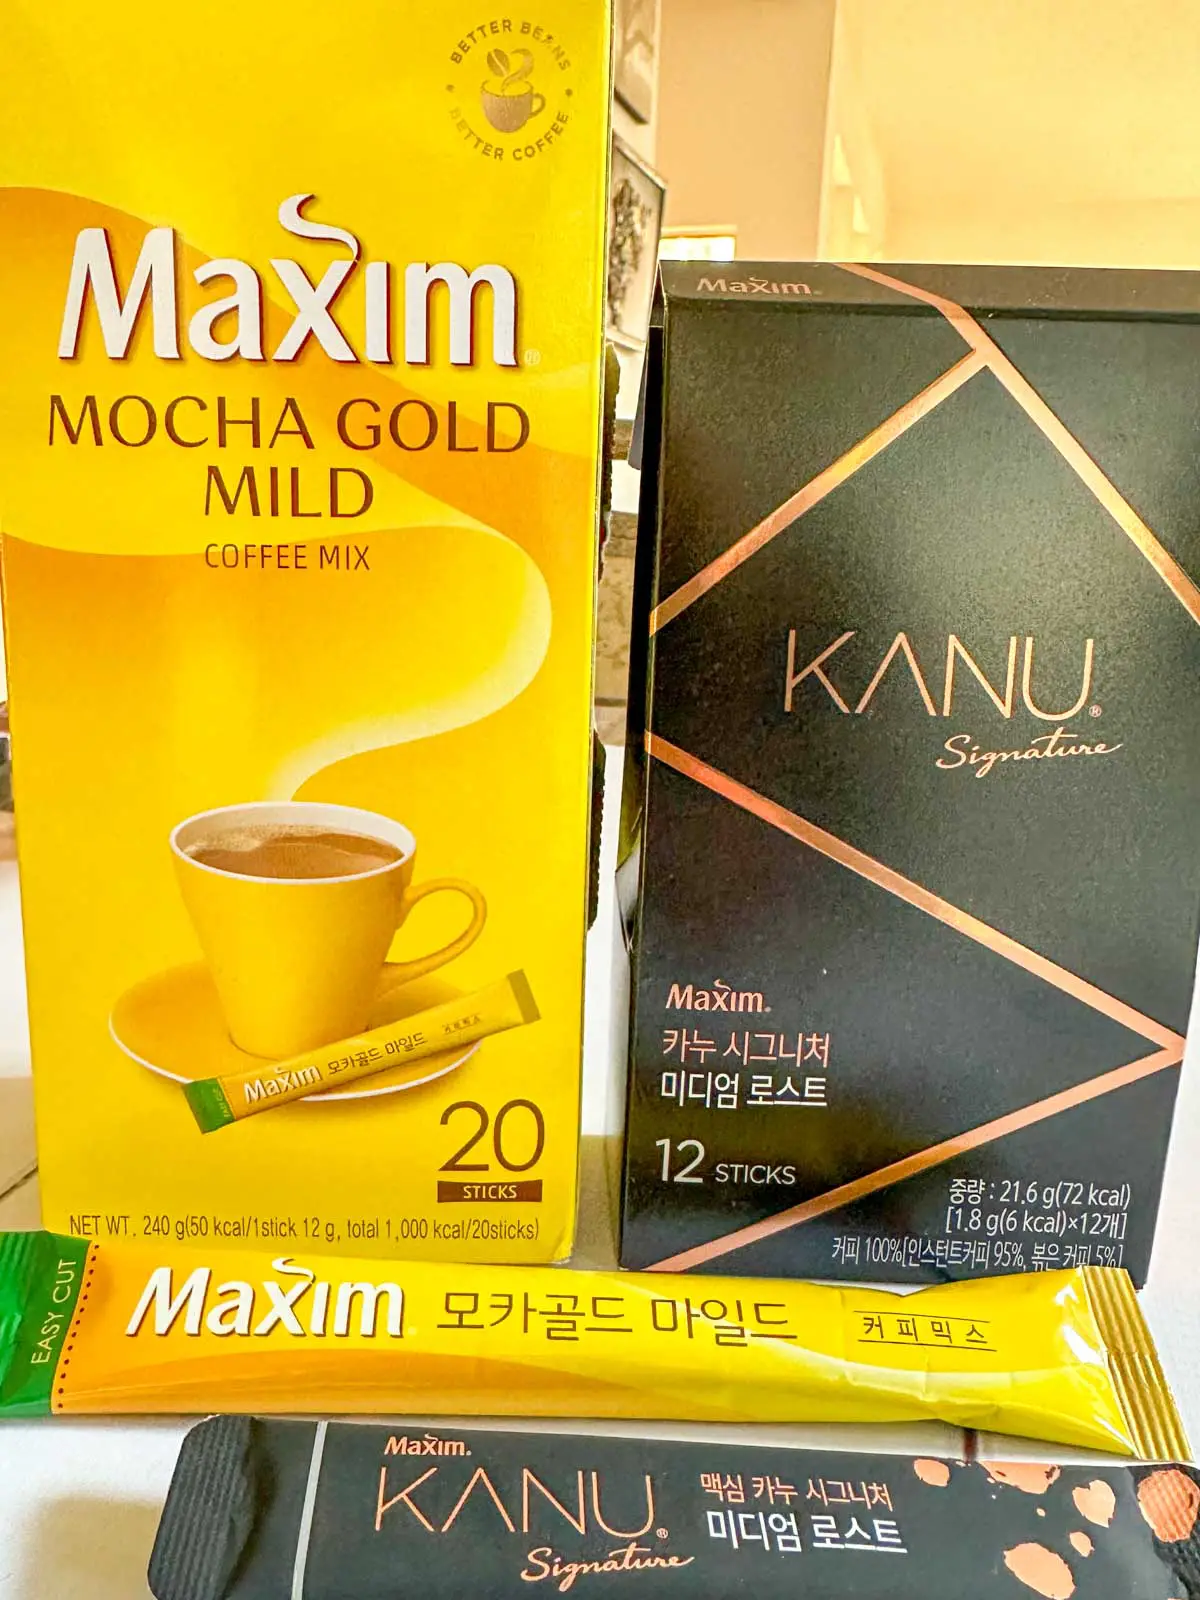 A package of Maxim Mocha Gold Mild Coffee Mix and a package of Kanu Signature coffee mix. There are individual sticks of each of these coffees in front of the packages.